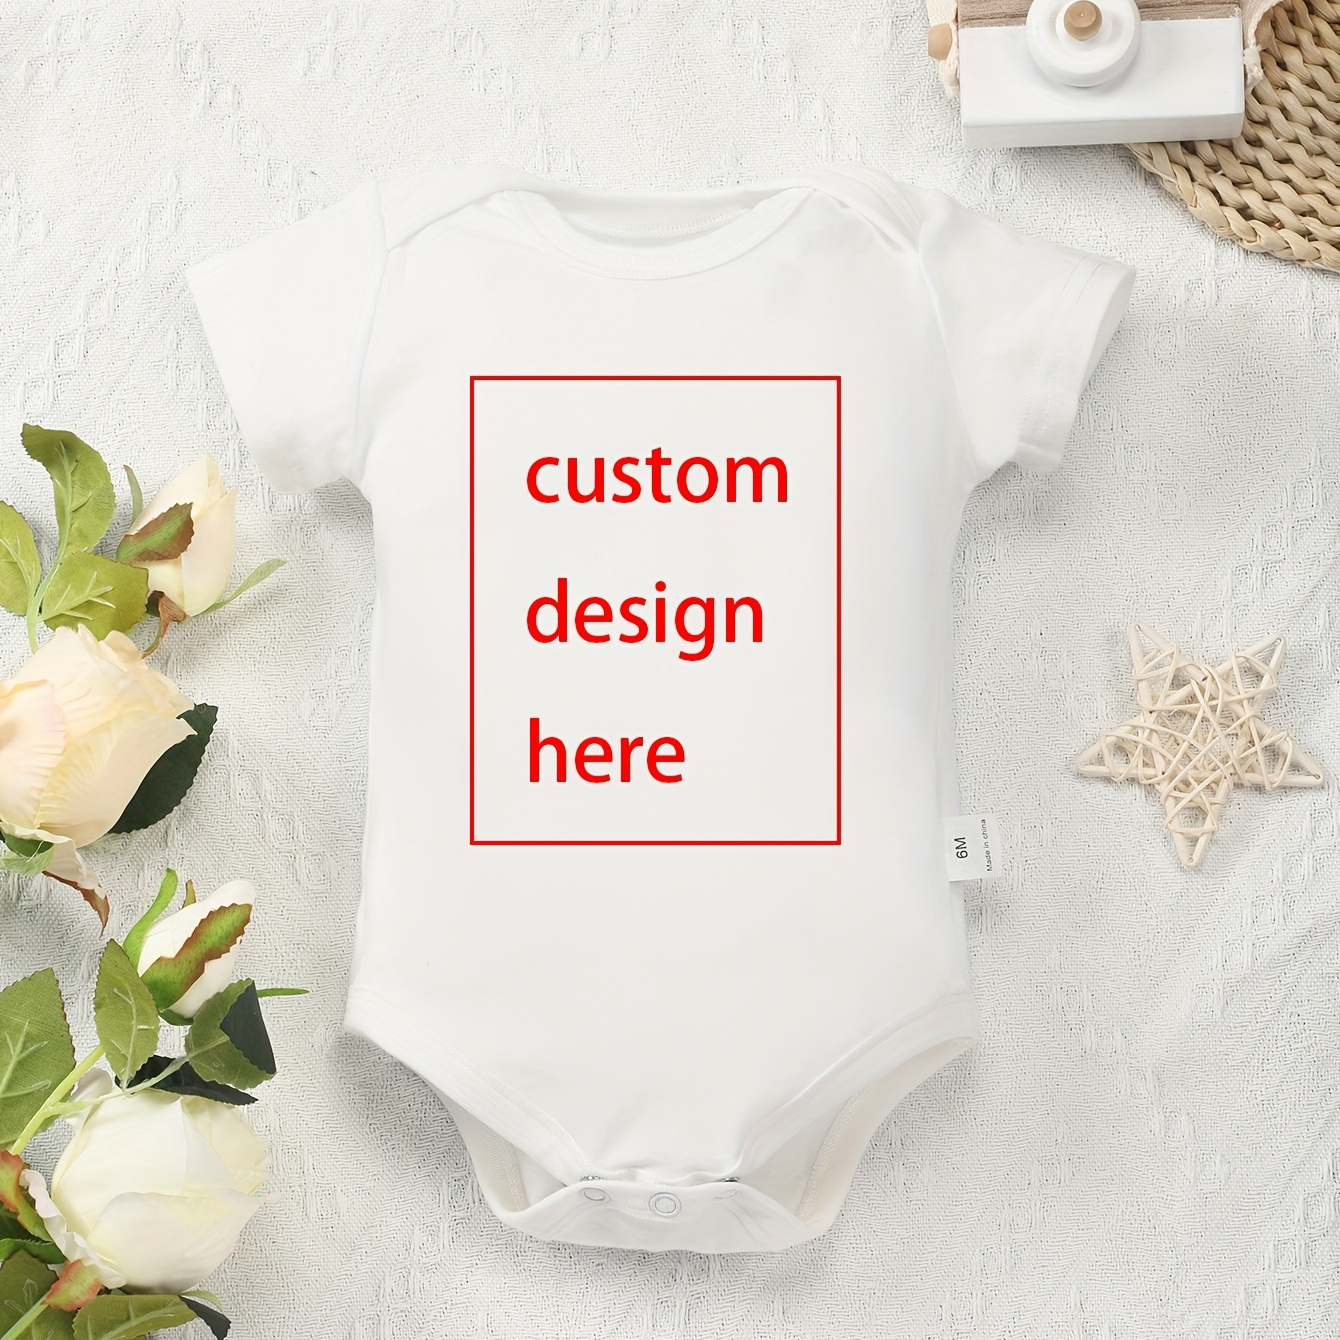 

Customized Design Print Baby Boys & Girls Personalized Cotton Bodysuit Onesie, Cozy Short Sleeve Jumpsuit Romper Top Birthday Gifts